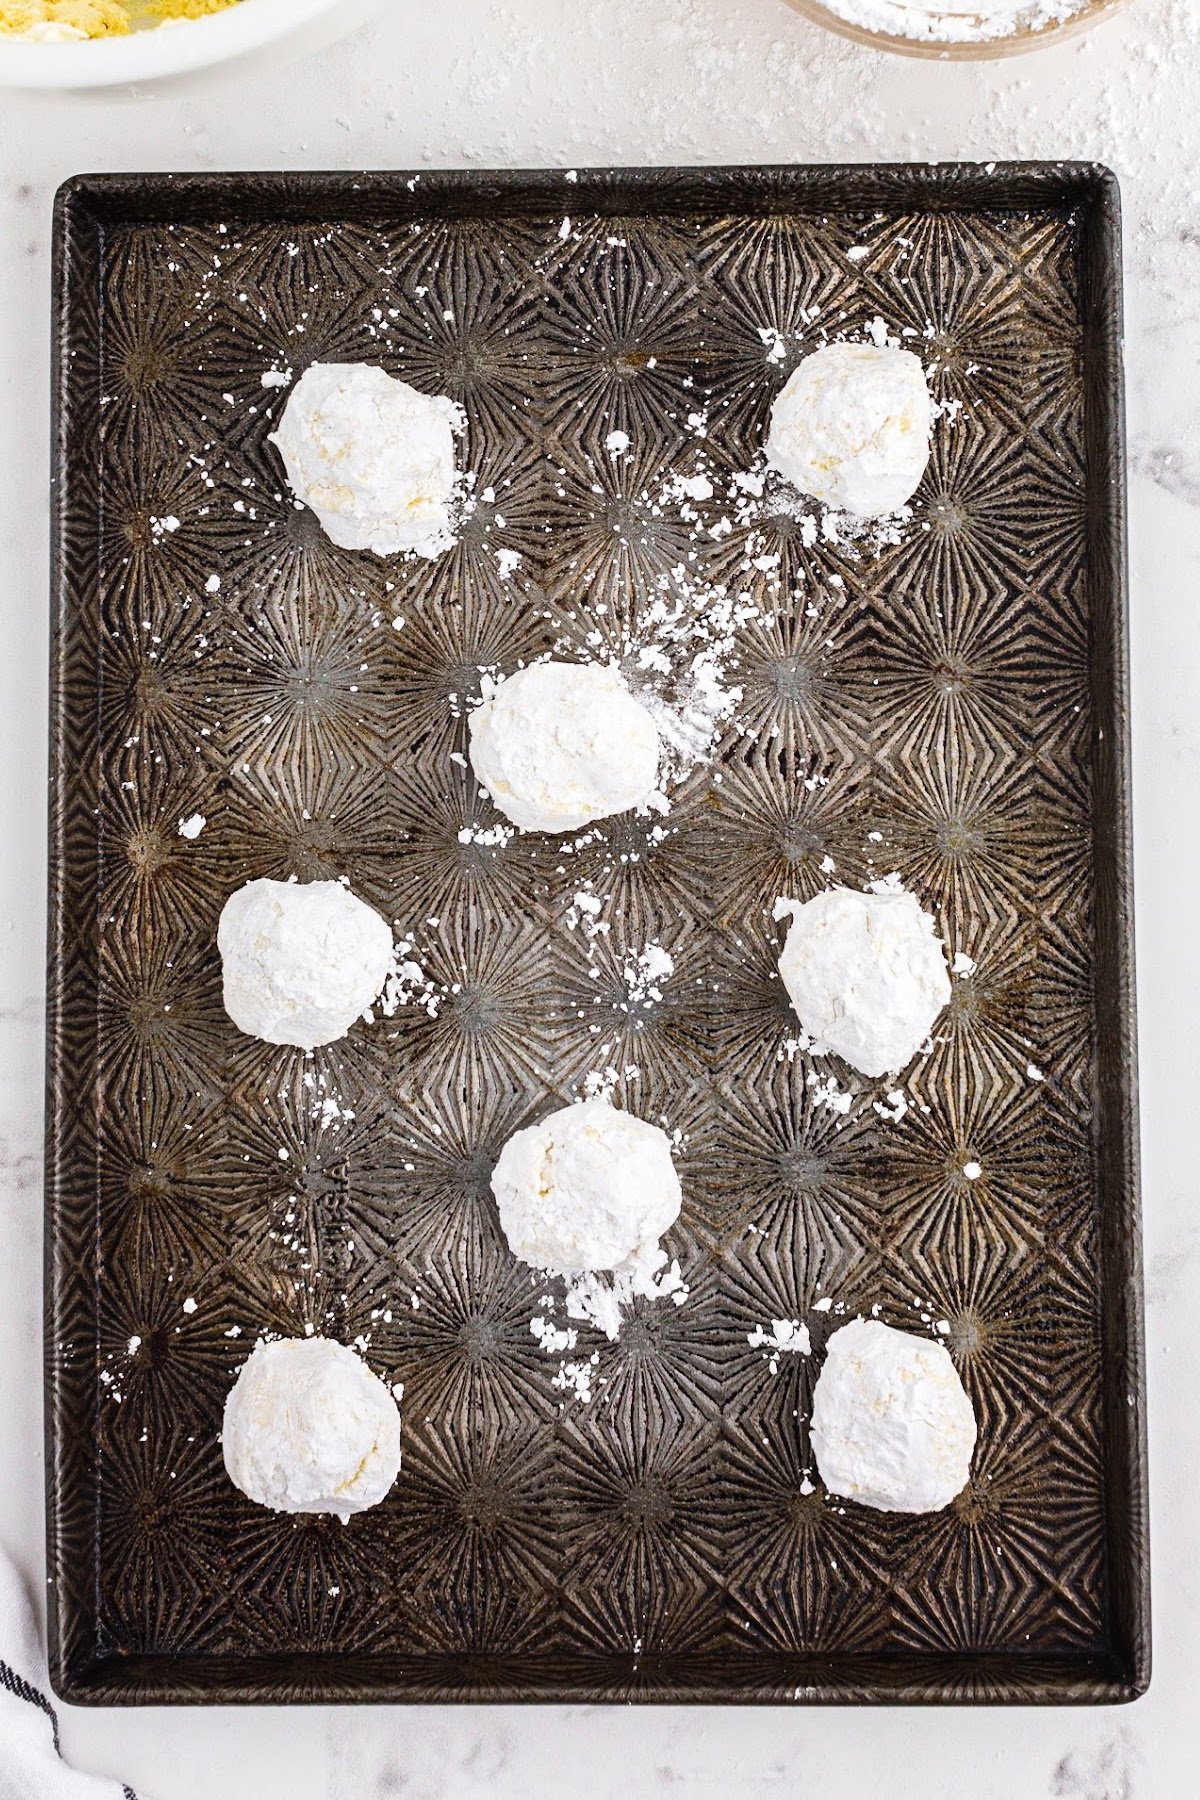 Rolled cool whip cookies in powdered sugar.